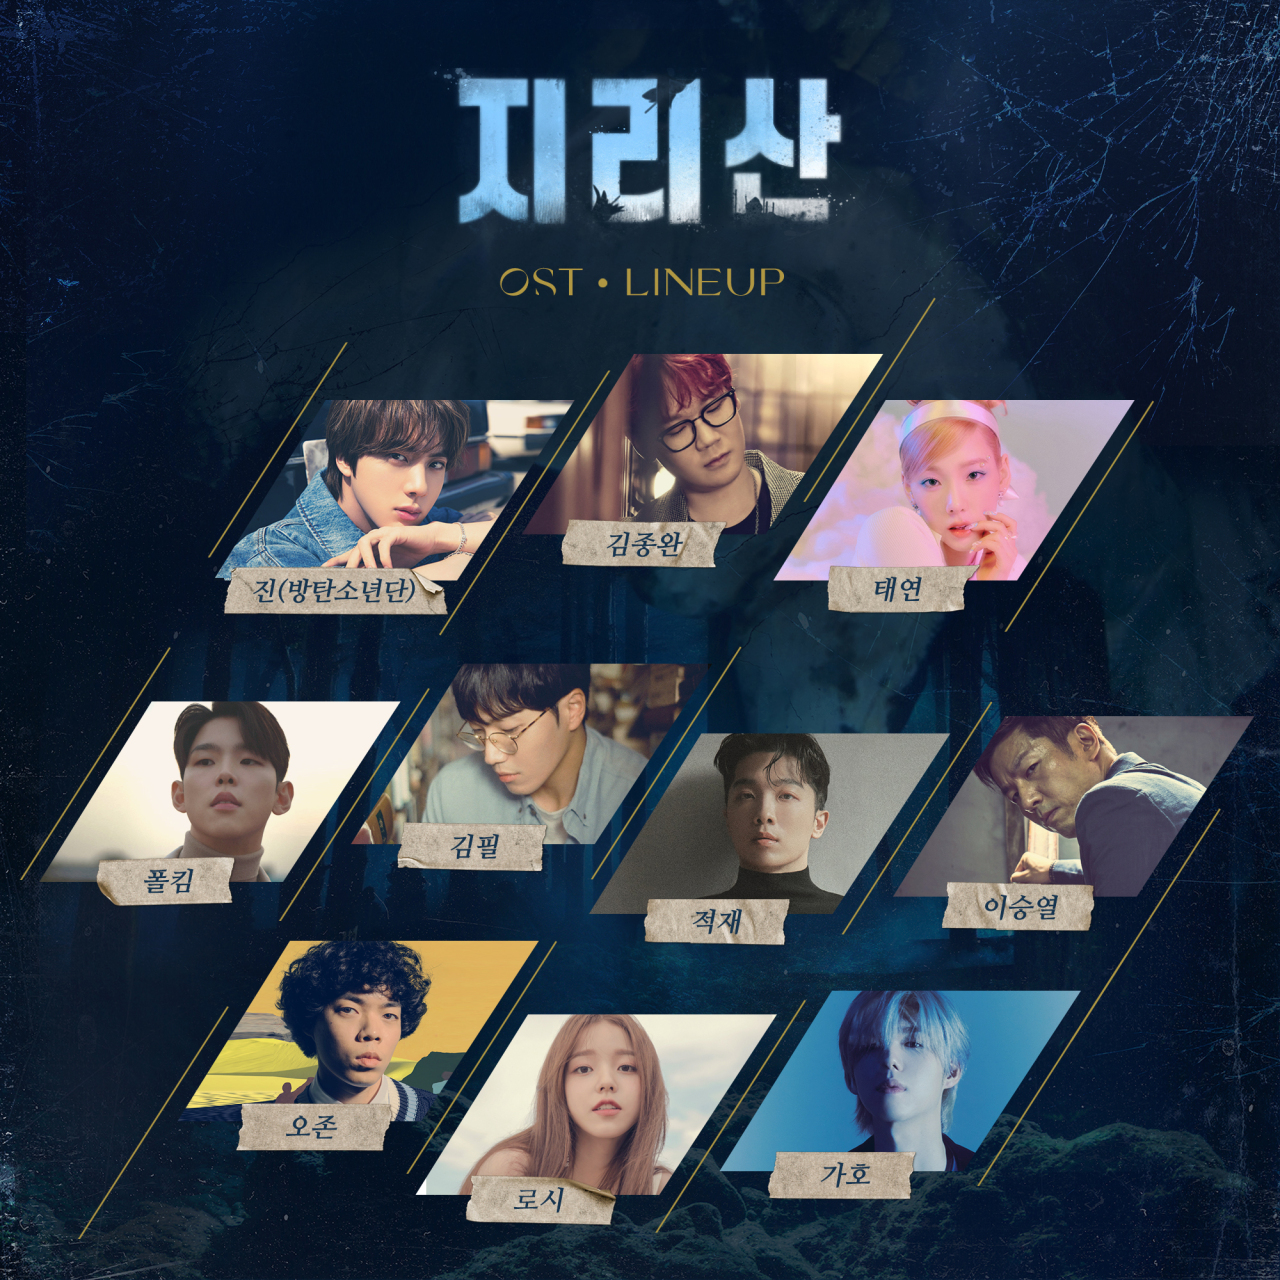 This image shows artists participating in the soundtrack of “Jirisan” (Astory and Most Contents)